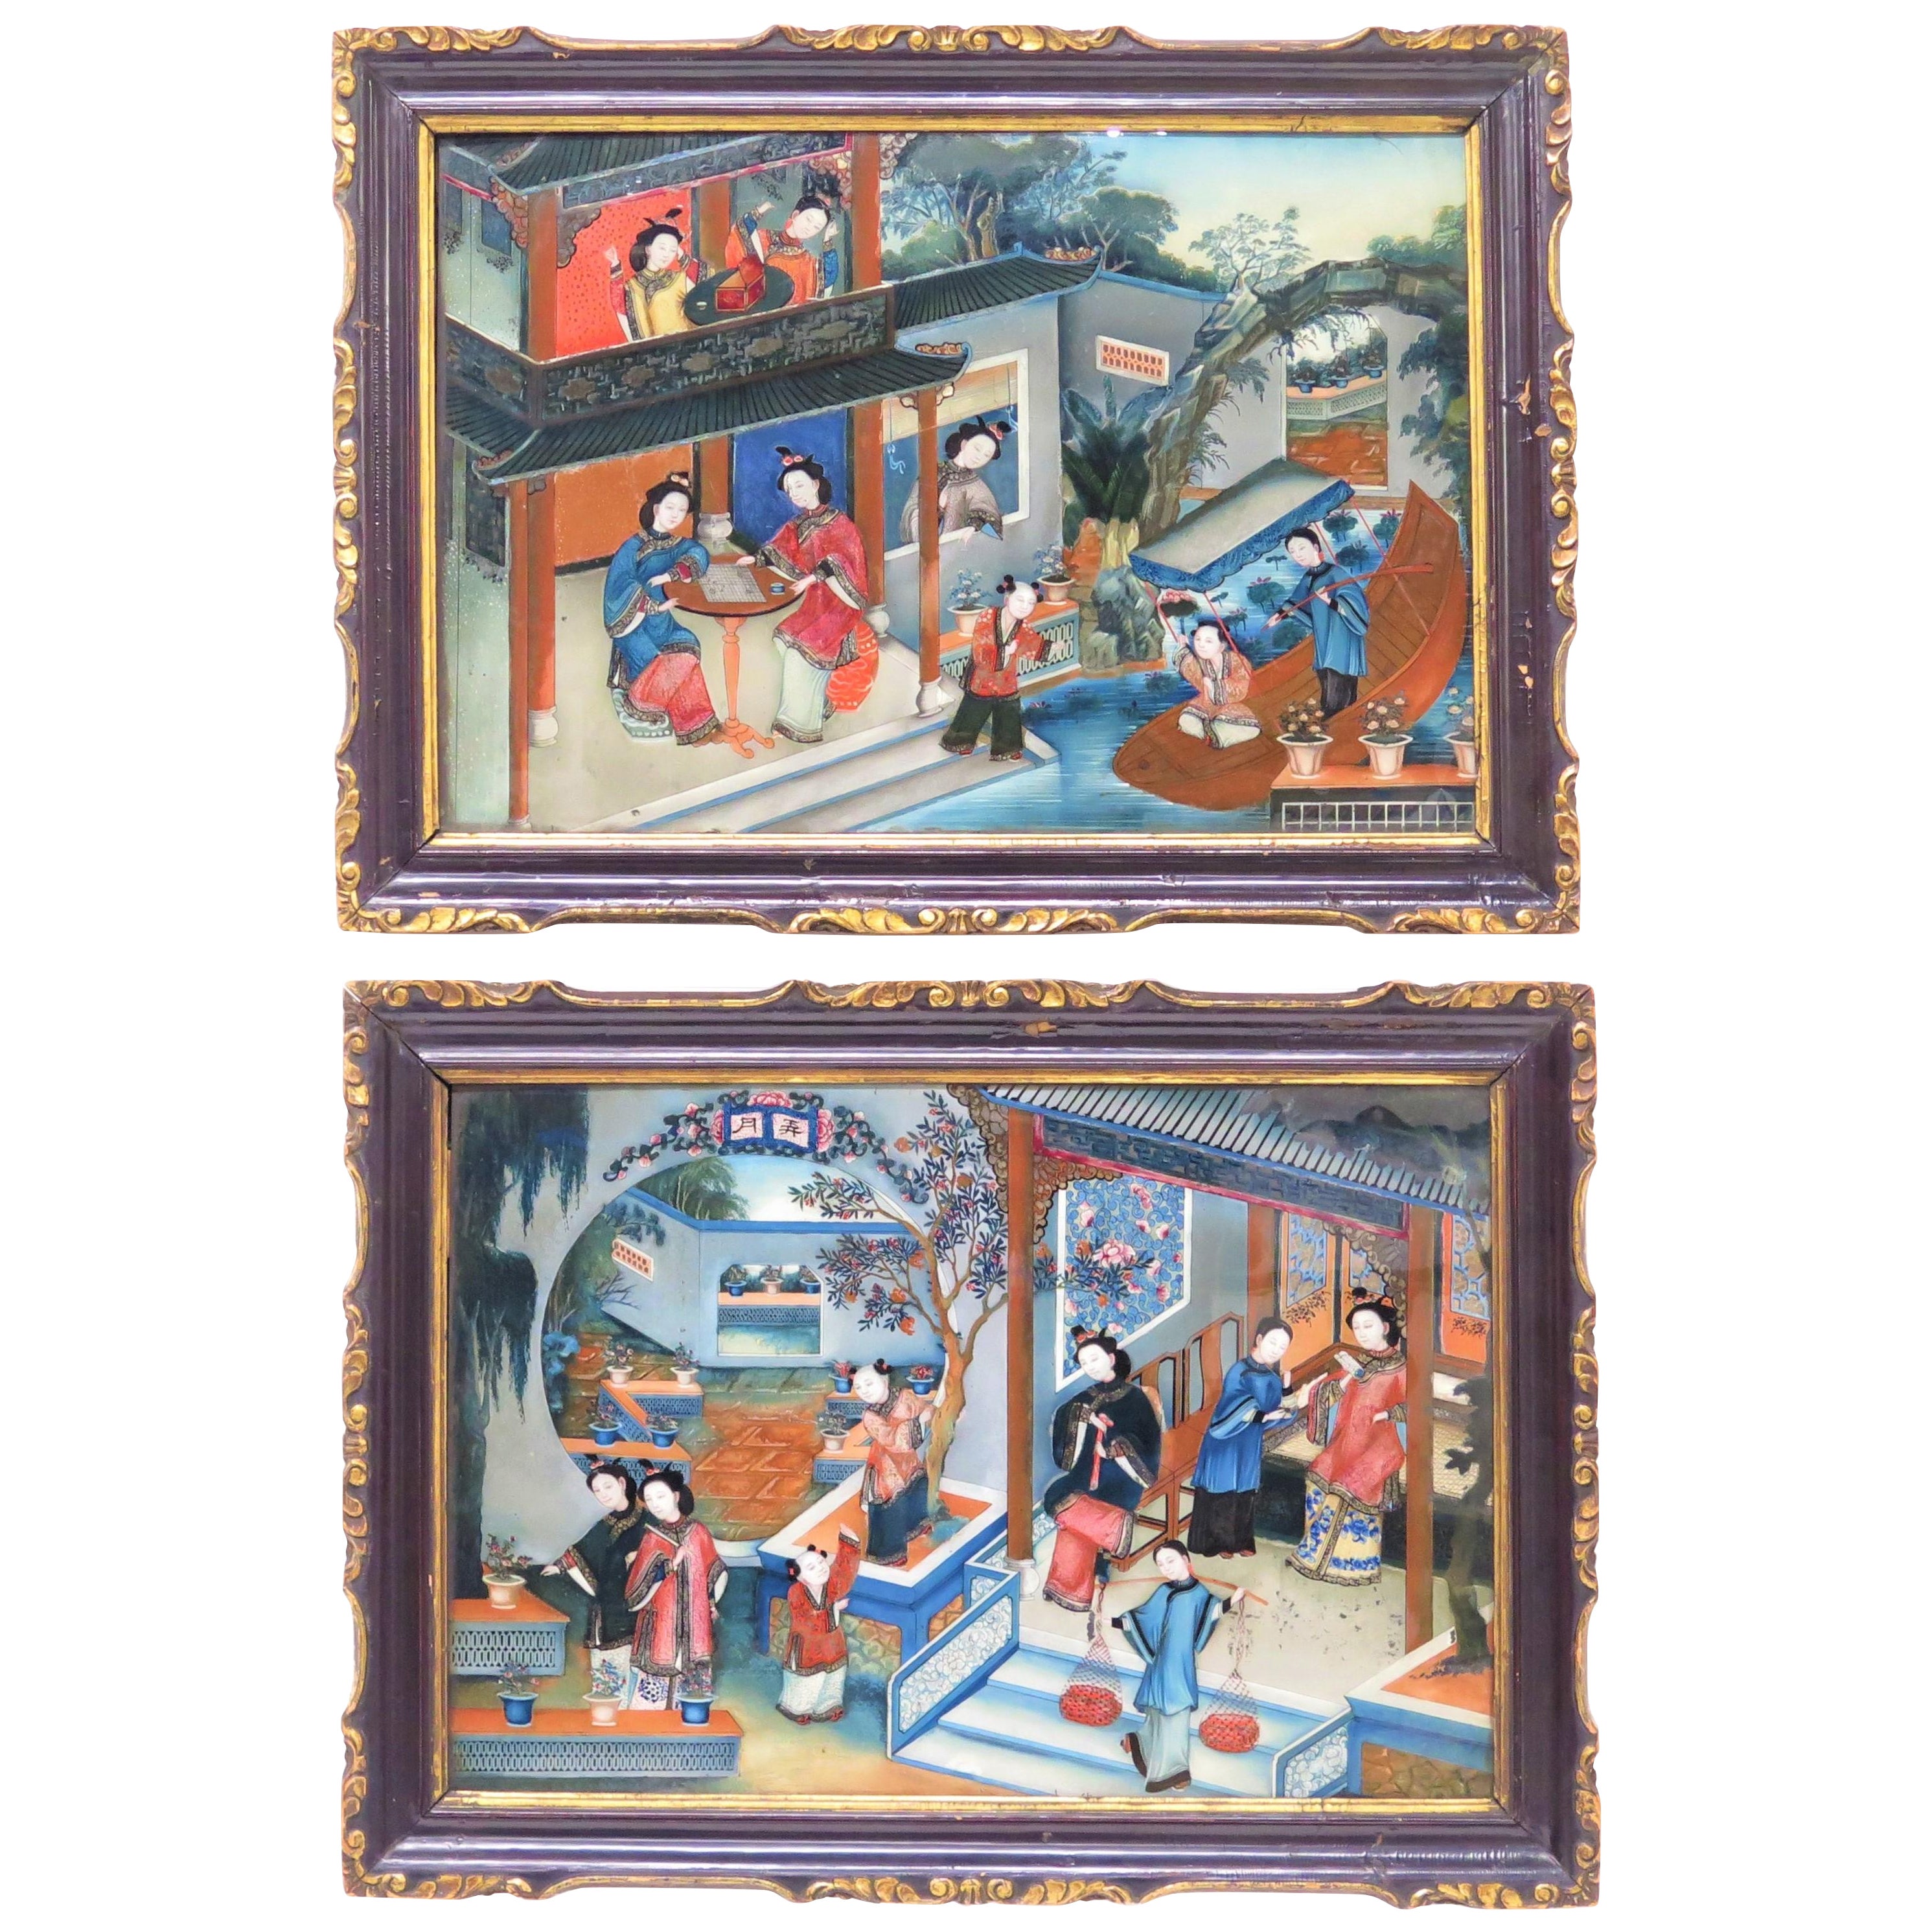 Pair of Fine Chinese Export Reverse Paintings on Glass, Circa 1830